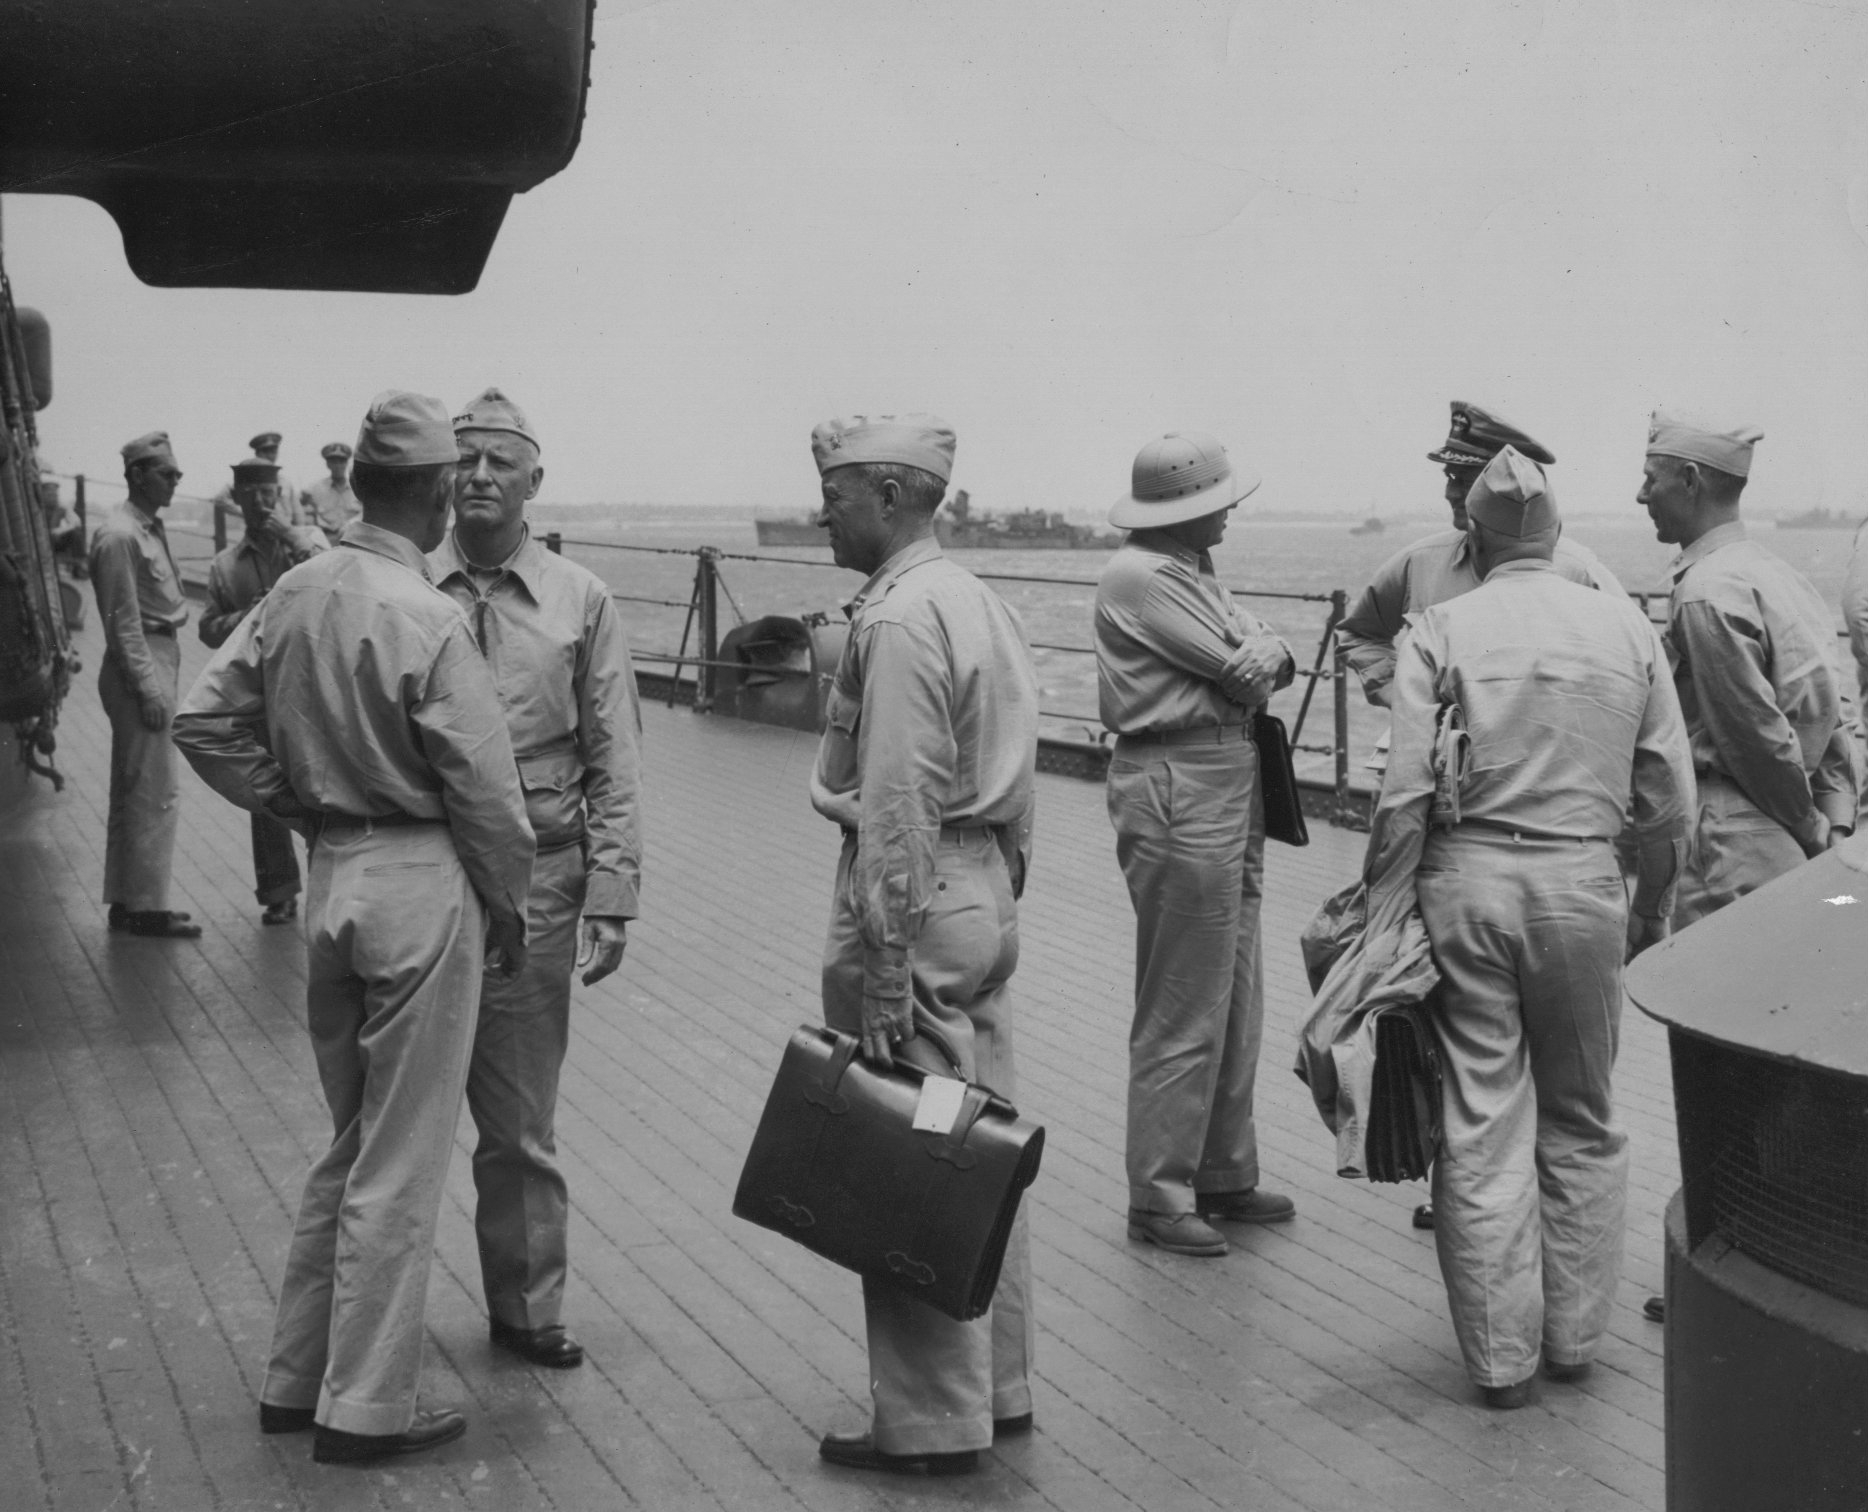 Admiral Raymond Spruance and Admiral Chester Nimitiz aboard USS New Jersey, date unknown, photo 2 of 4; note Robert Elliott in background, touching face